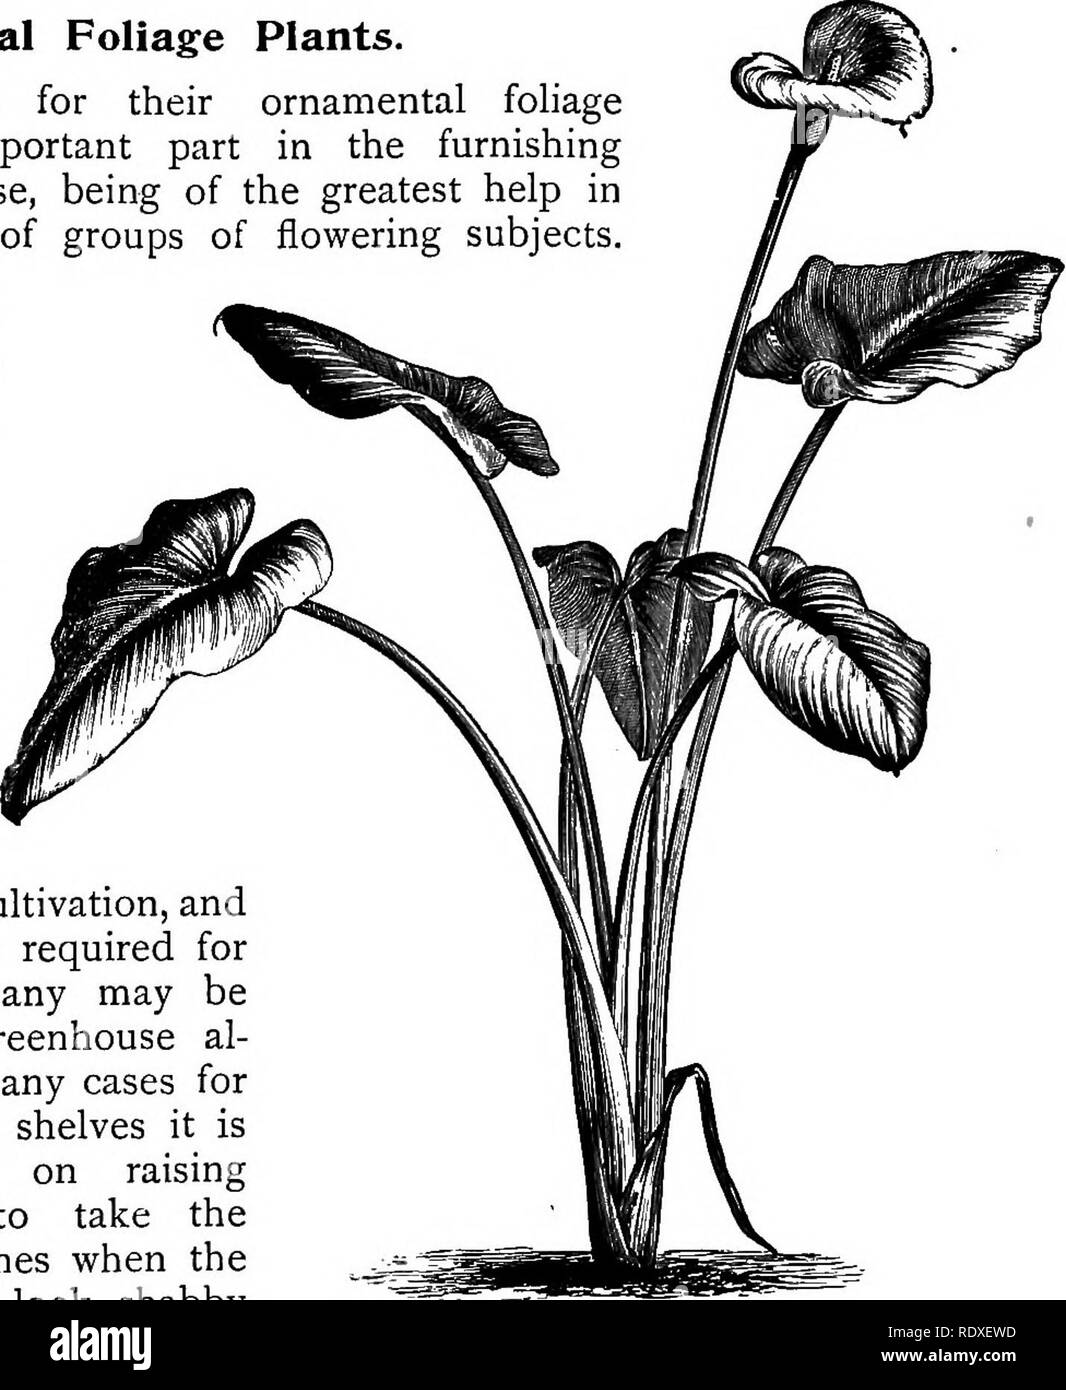 . The Book of gardening; a handbook of horticulture. Gardening; Horticulture. ON GREENHOUSE PLANTS. 747 Vallota purpurea (Scarborough Lily) somewhat resembles a Hippeastrum, and should receive similar treatment. Raise from offsets, and grow in sandy loam, peat, and leaf-soil. Keep dry in the cool pit in winter, grow warm in summer after flowering, and then partially dry off in early autumn. The flowers are scarlet. Veltheimia viridifolia is a useful bulb, flowering in spring. Propagate by offsets. At the time of potting in autumn grow in, loam, leaf-soil, and sand, in a cool pit or in frames.  Stock Photo